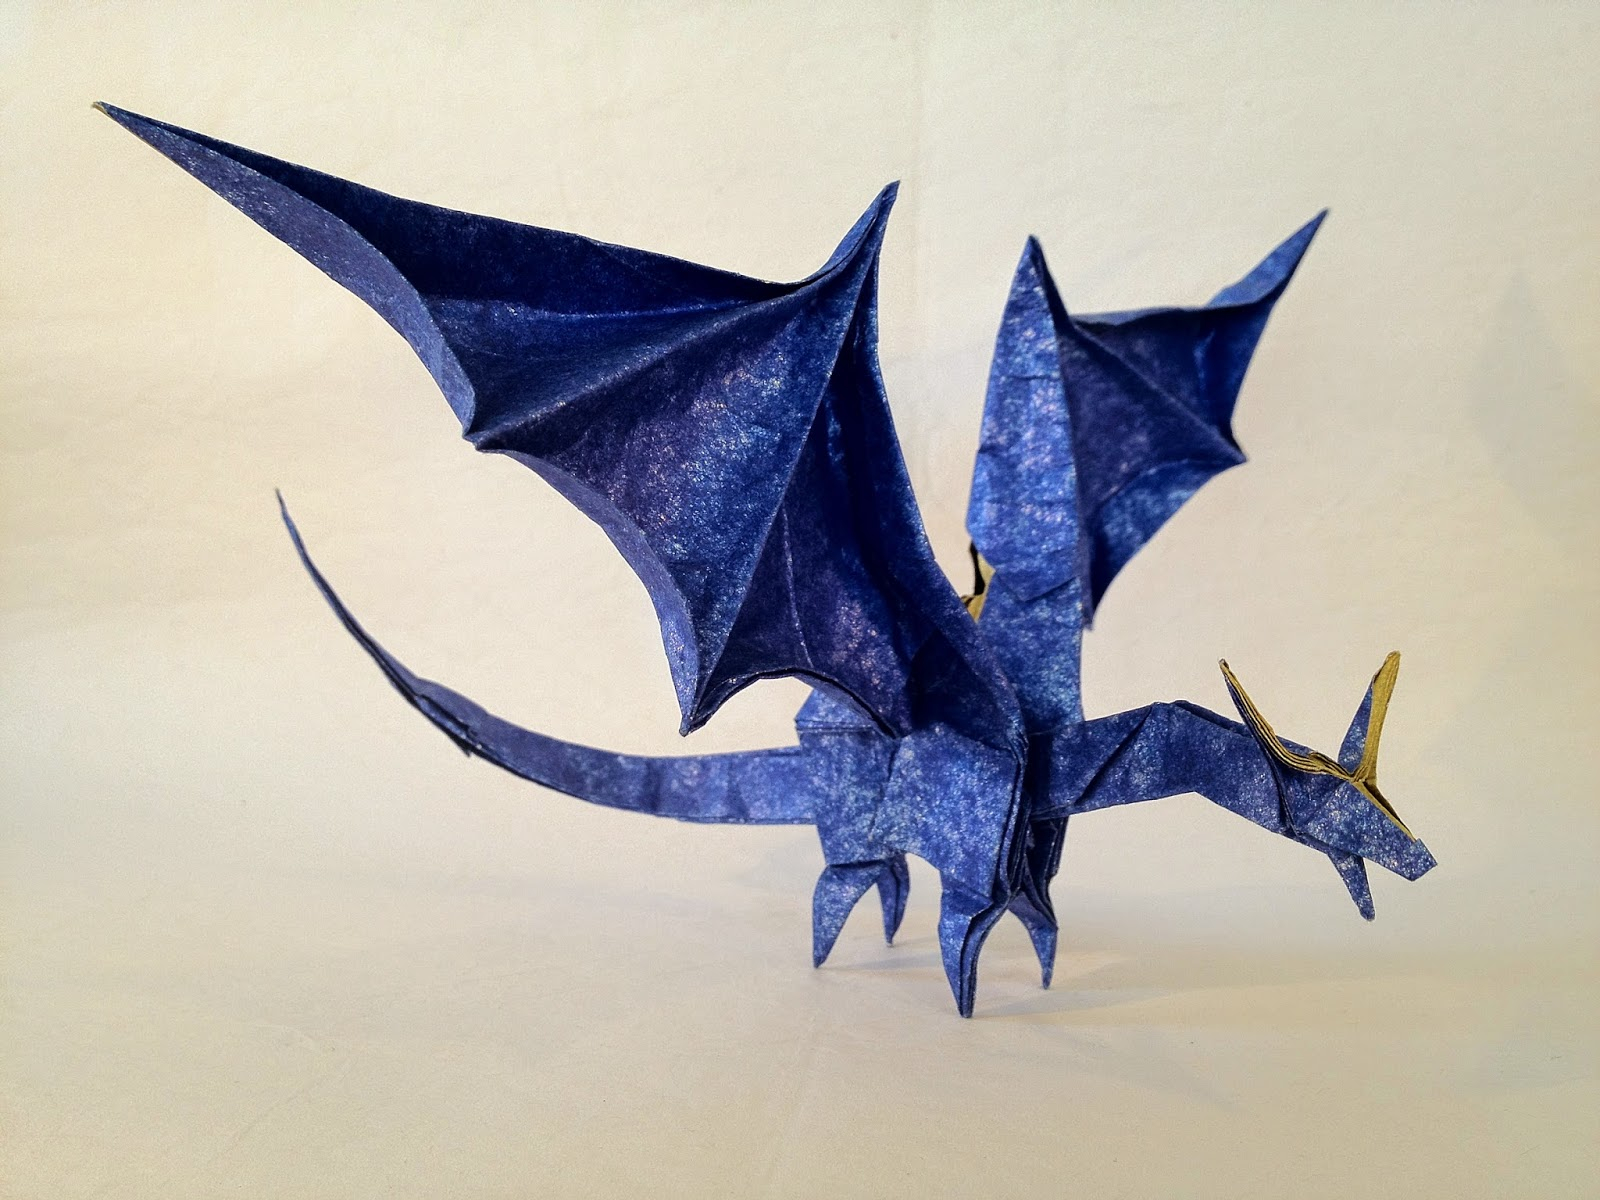 Origami For Kids Dragon Simple Origami Dragon Easy Origami Instructions For Kids Crafts